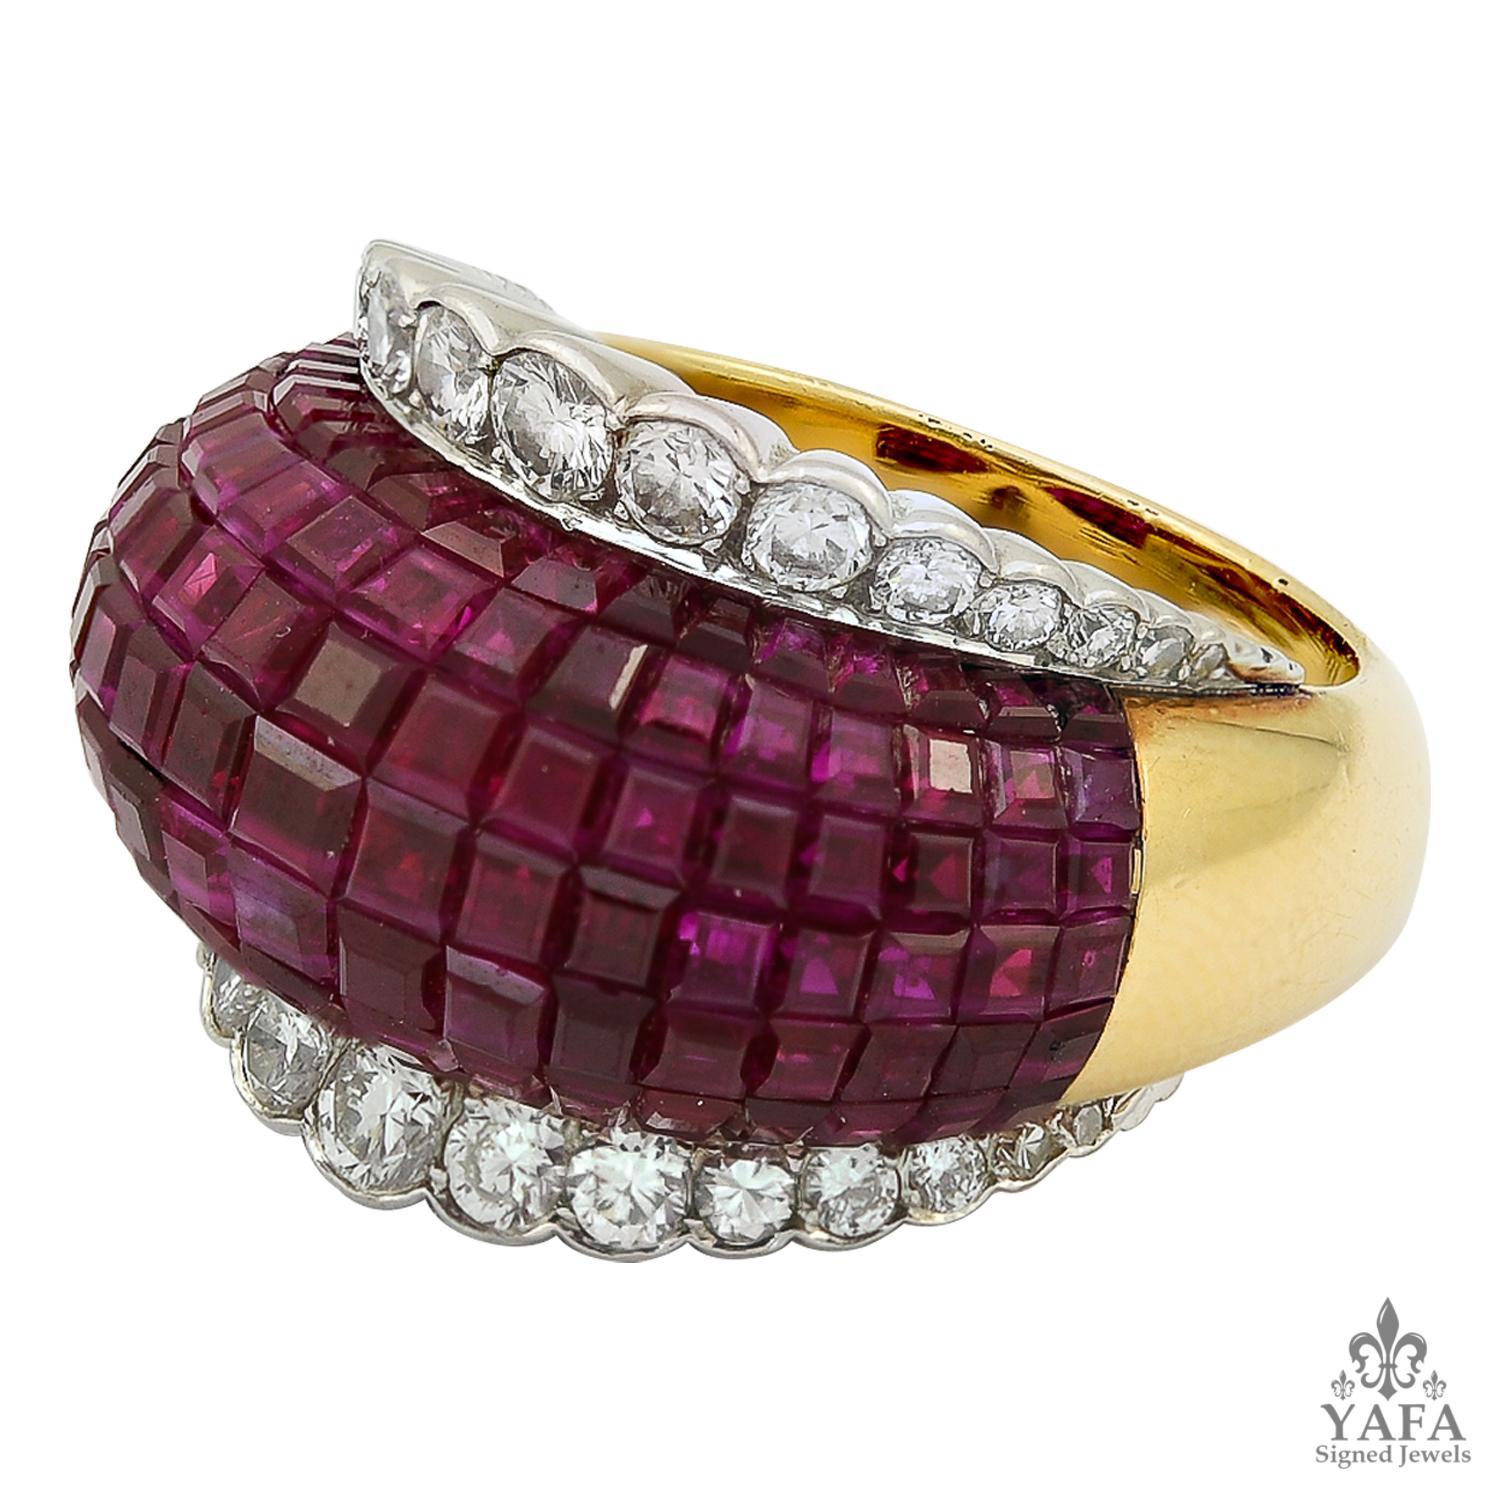 VAN CLEEF & ARPELS Mystery-Set Ruby, Diamond Dome Ring
18k yellow gold and white gold dome ring, set with mystery-set ruby and brilliant-cut diamonds.
ring size 7.5
Signed “Van Cleef & Arpels“; circa 1960s; French